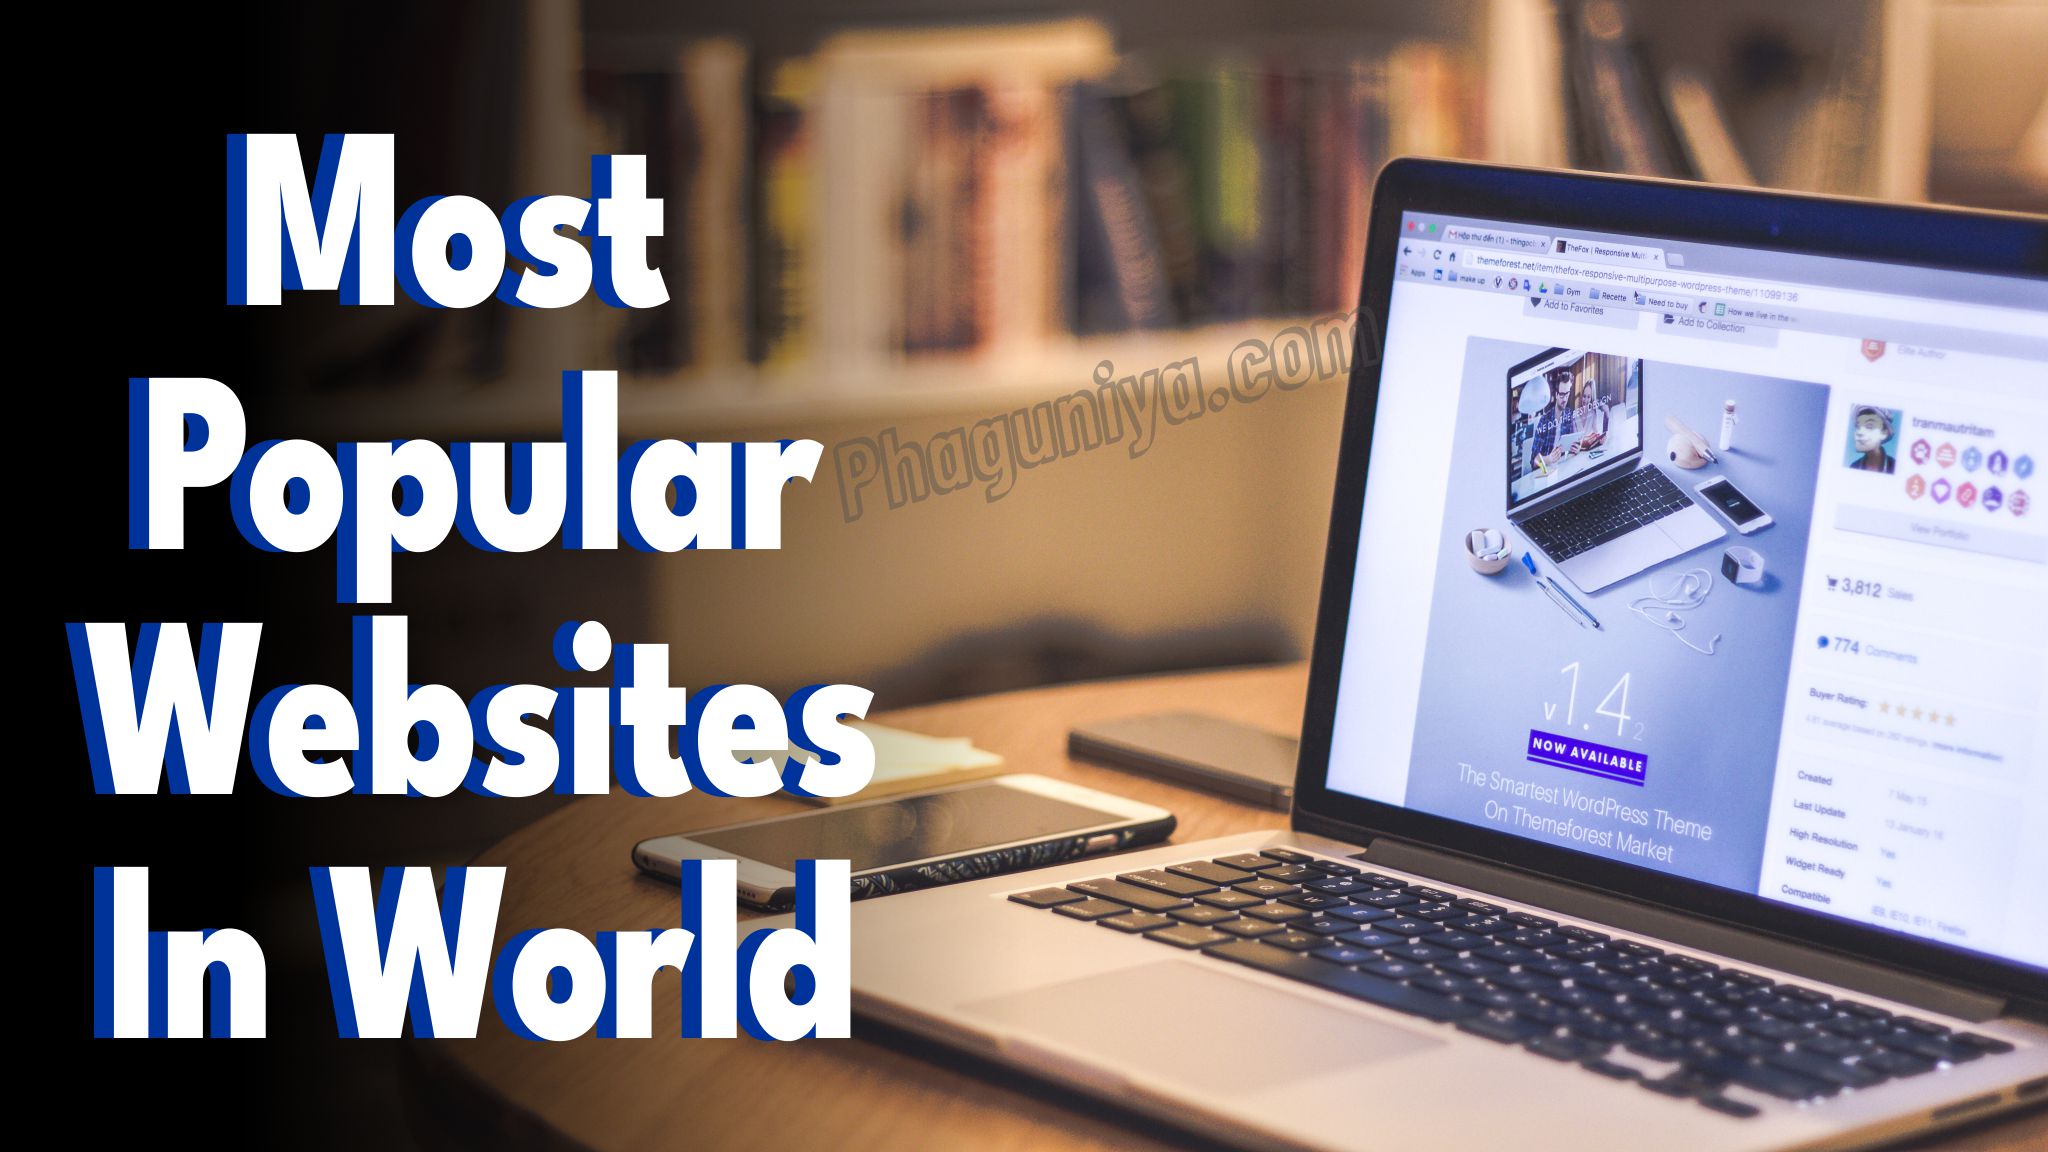 Most Popular Websites In The World,